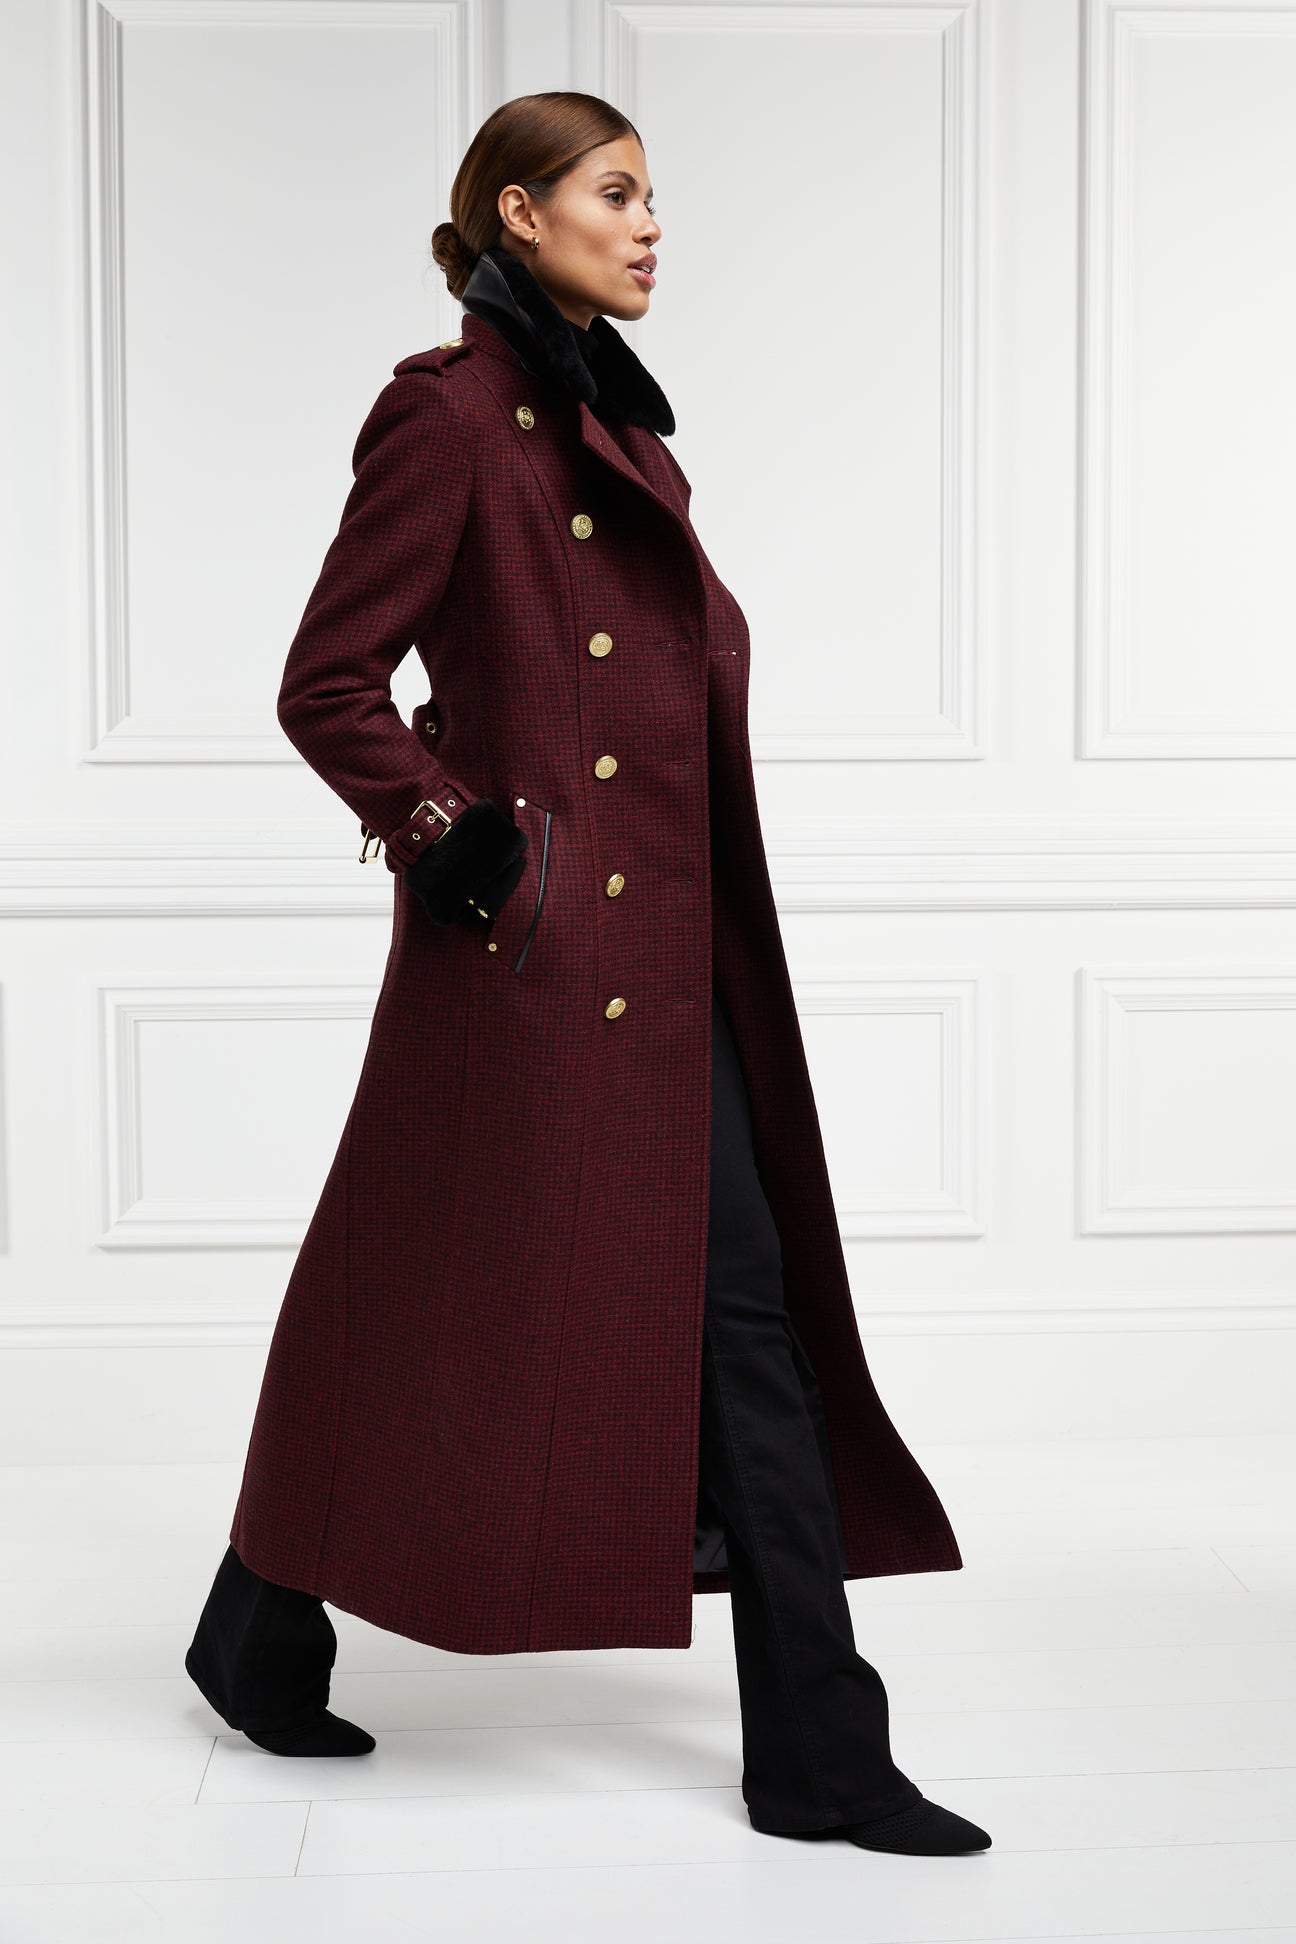 Gold Label Trench (Deep Red Houndstooth) – Holland Cooper